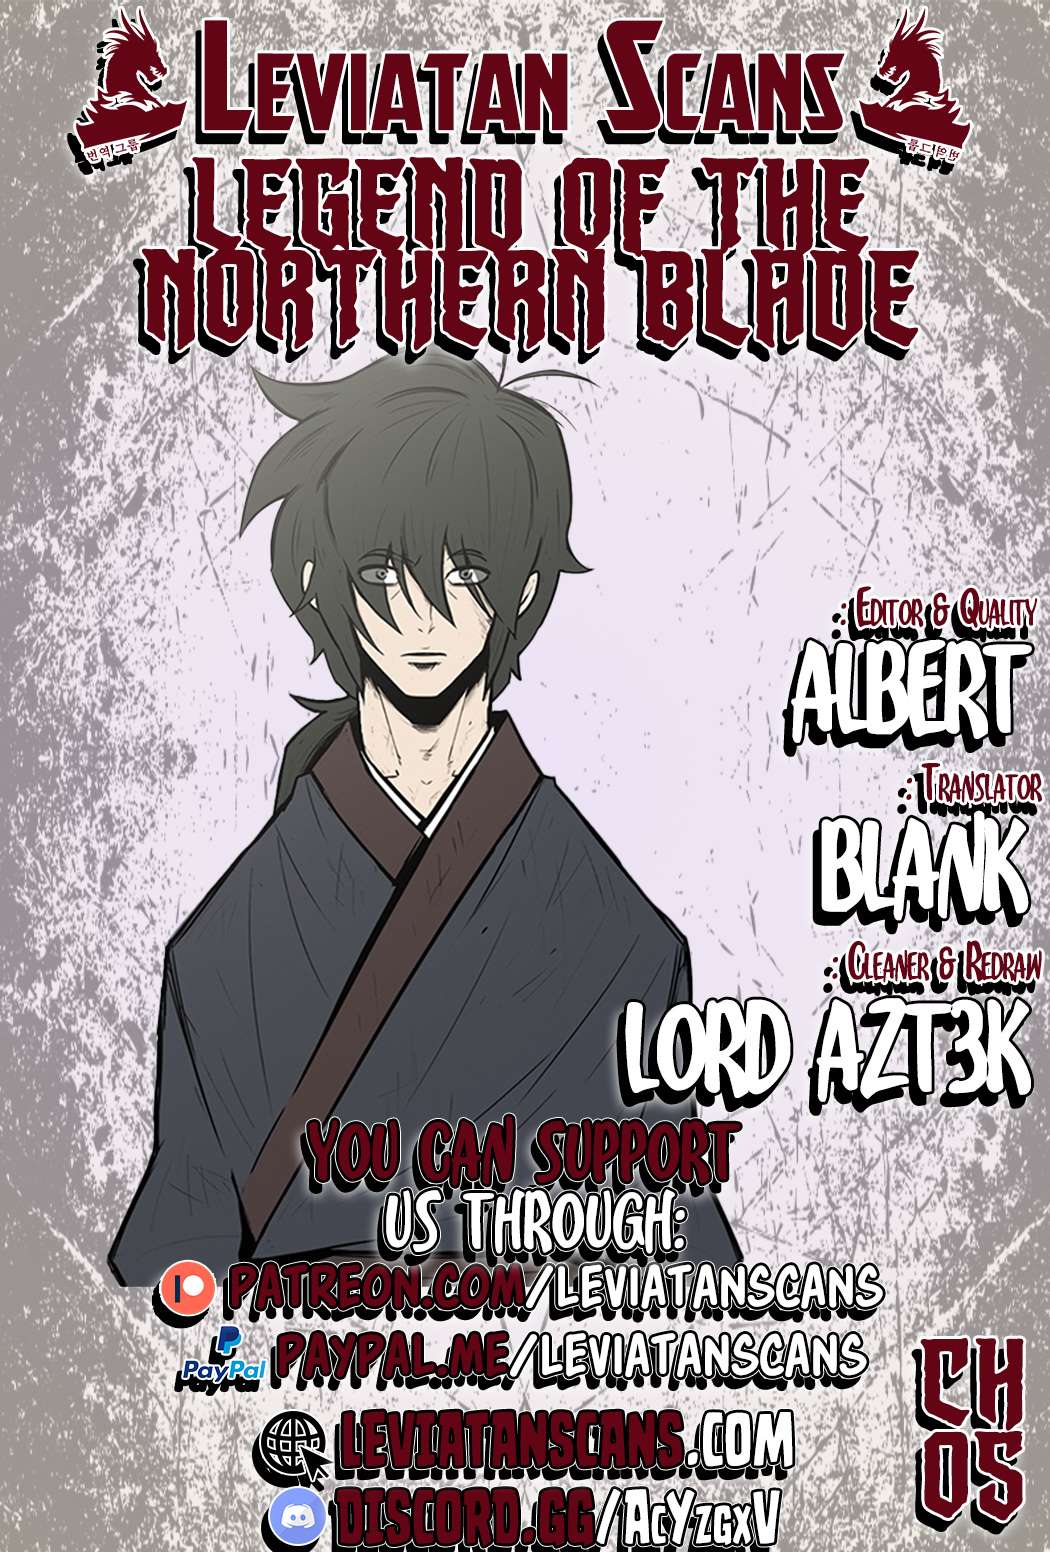 Legend of the Northern Blade chapter 5 page 1